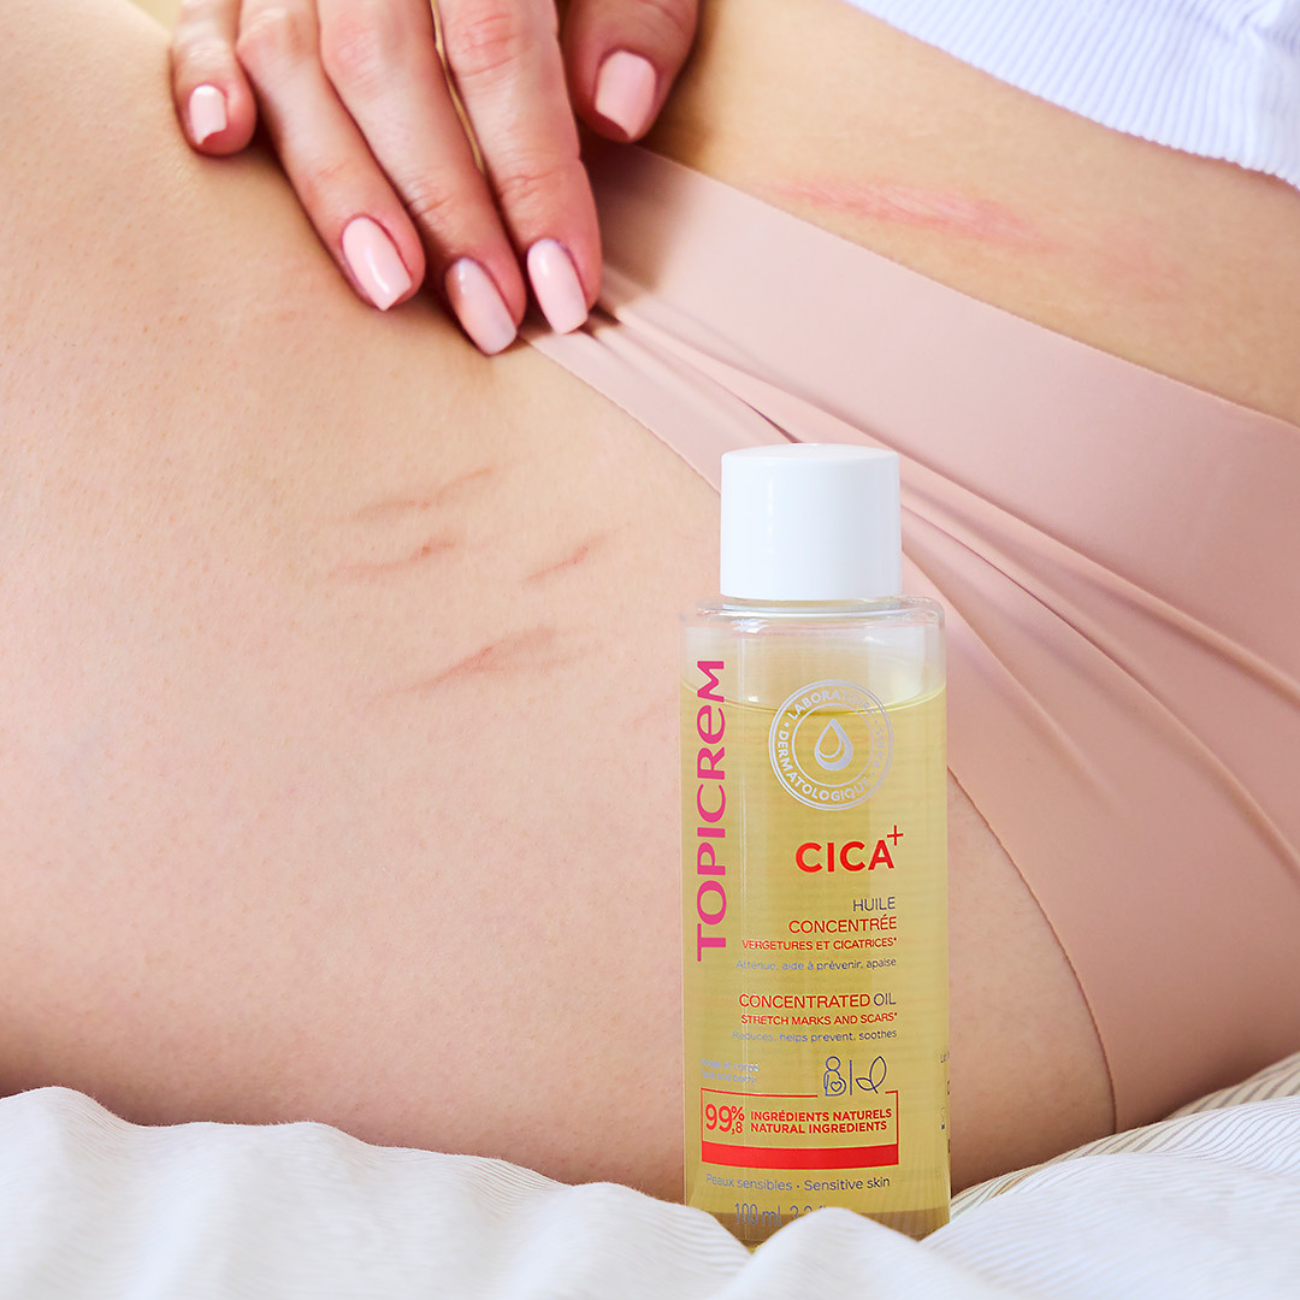 CONCENTRATED OIL FOR STRETCH MARKS AND SCARS